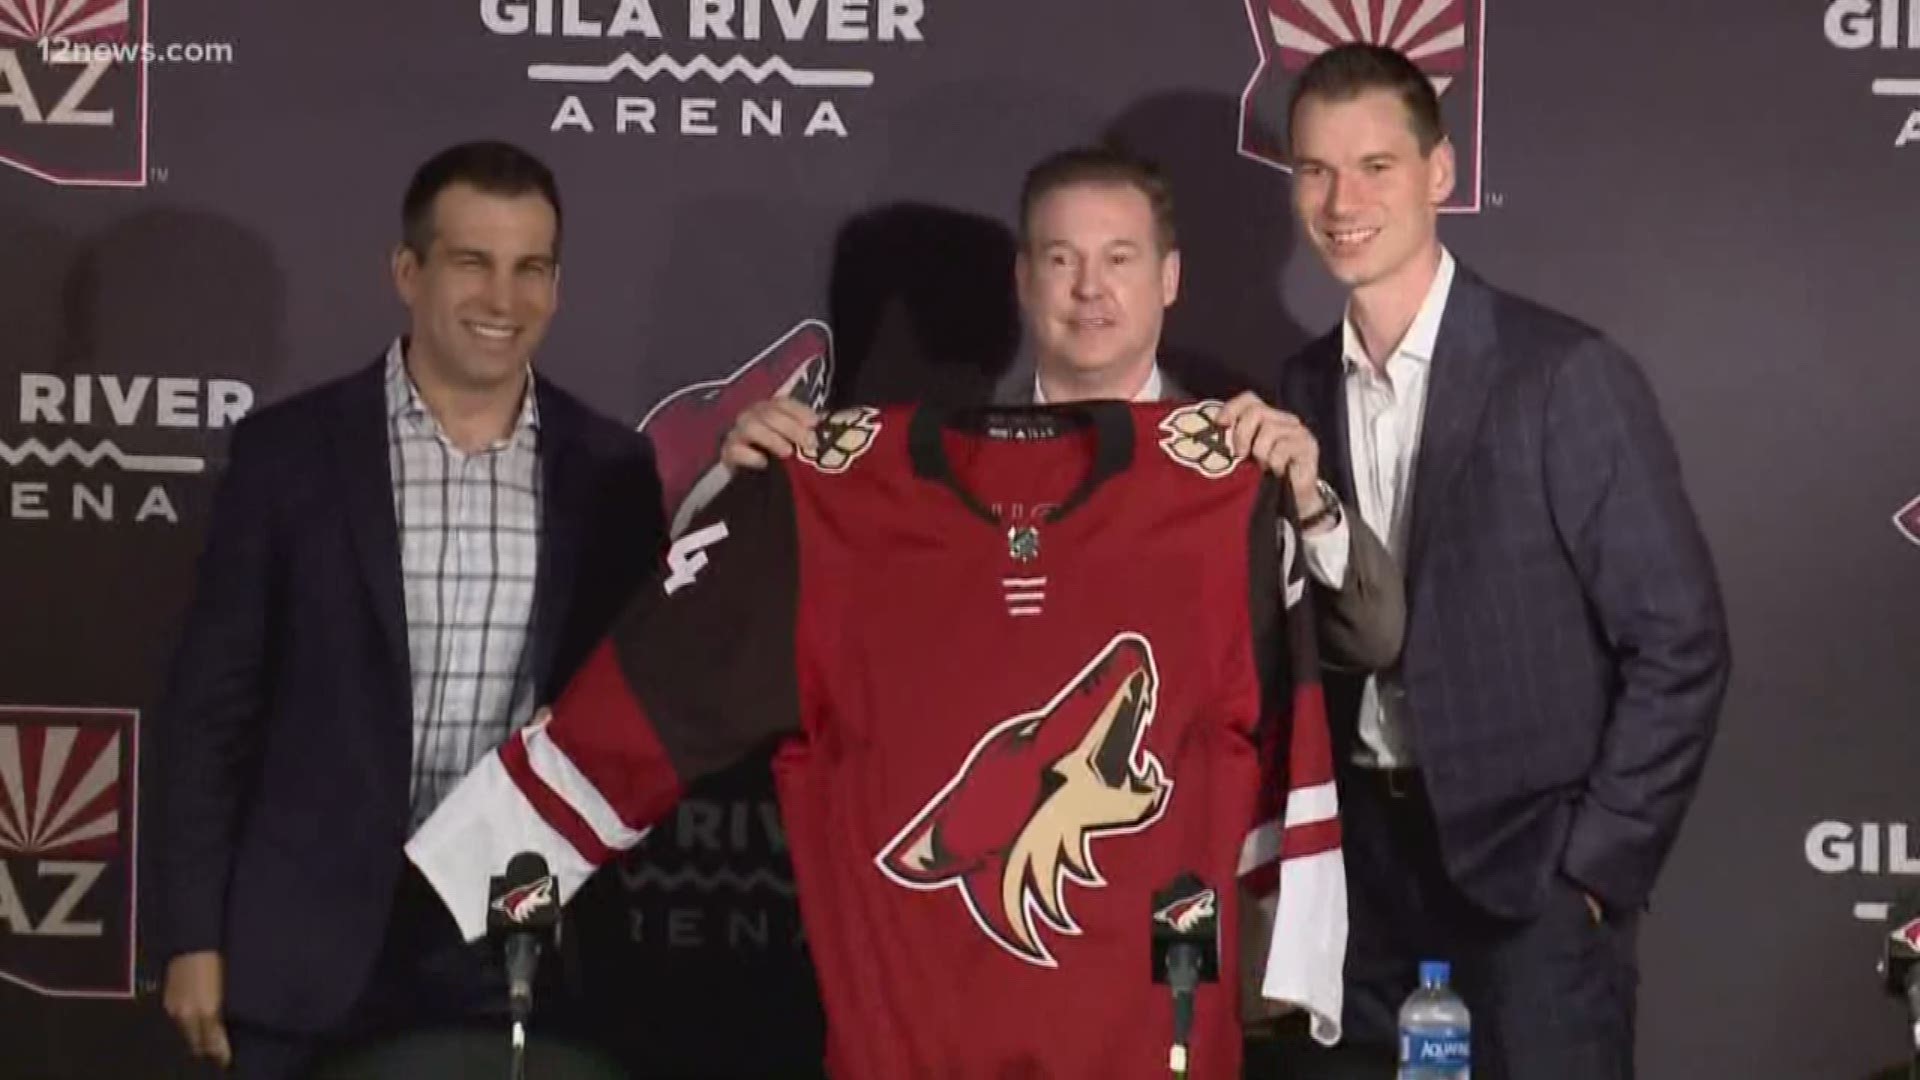 Arizona Coyotes part ways with President and CEO Ahron Cohen | 12news.com